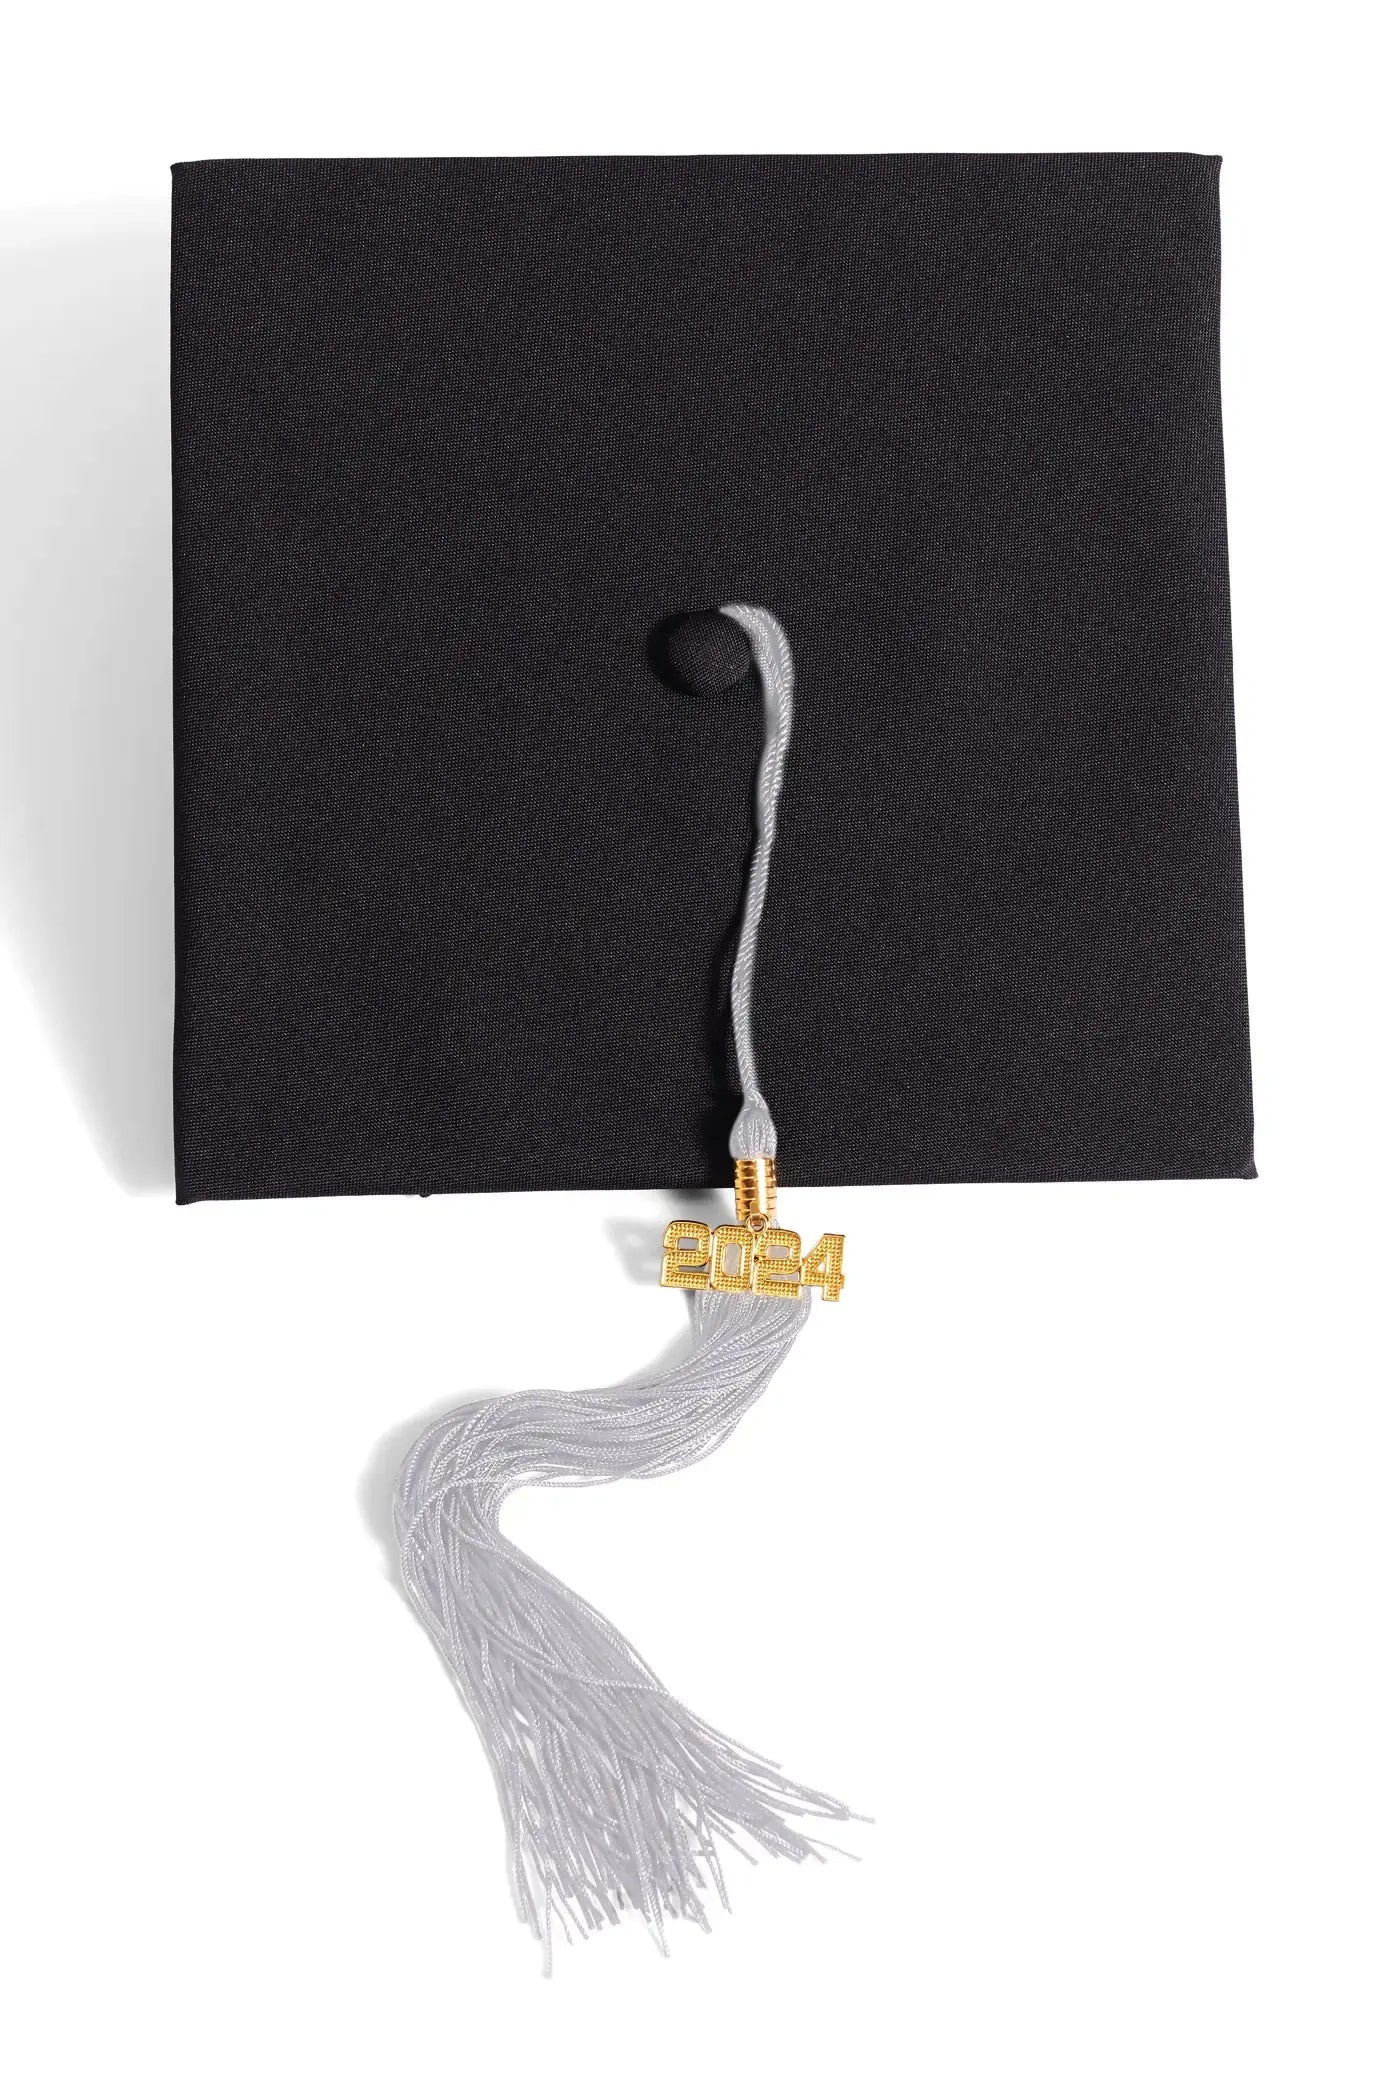 Bachelor's Degree Cap & Gown Set for University of Texas at Austin